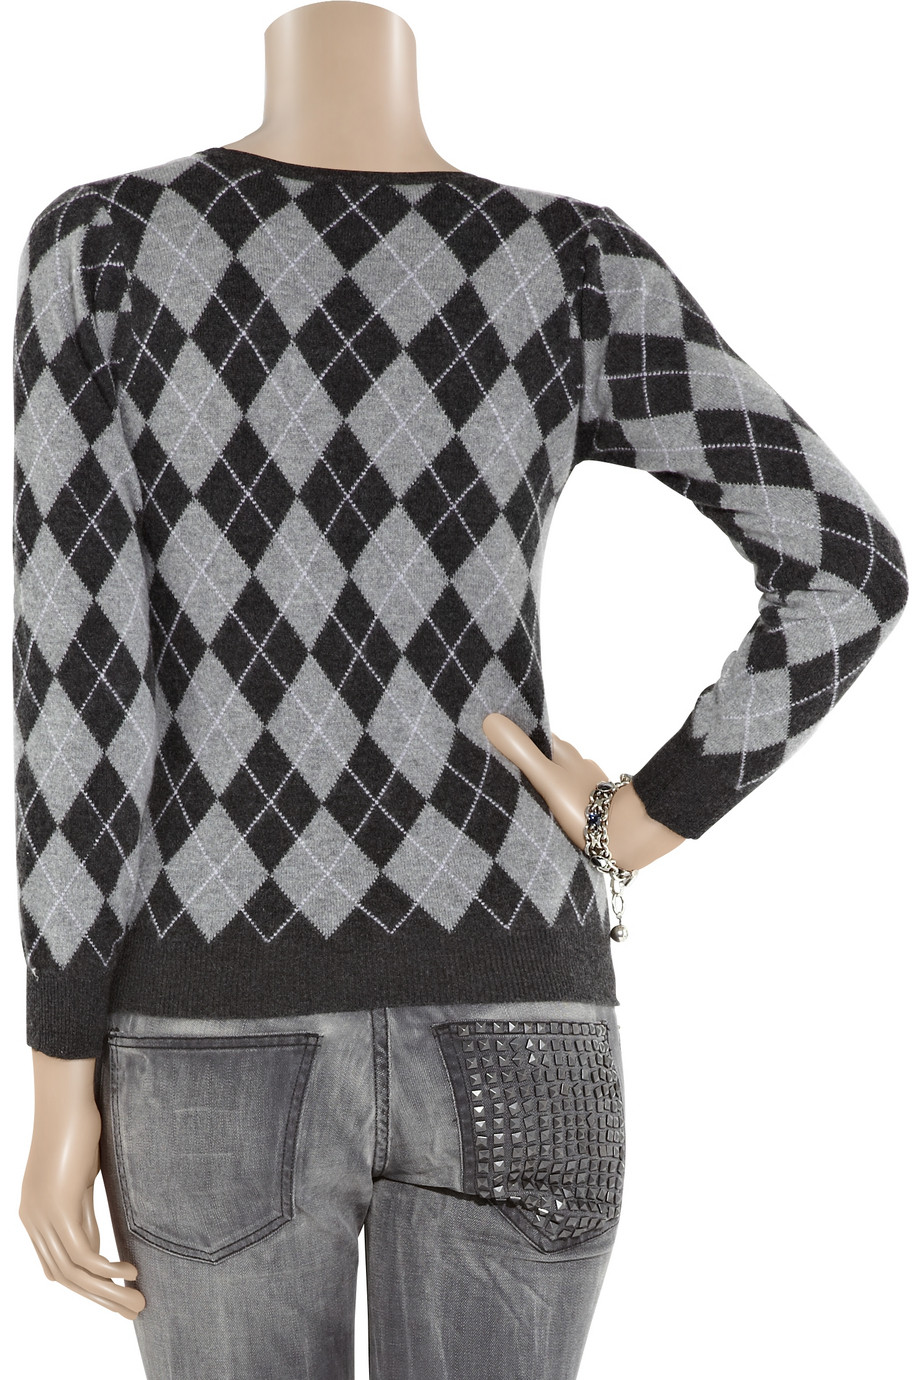 Pringle of Scotland Cashmere Argyle Sweater in Gray Lyst